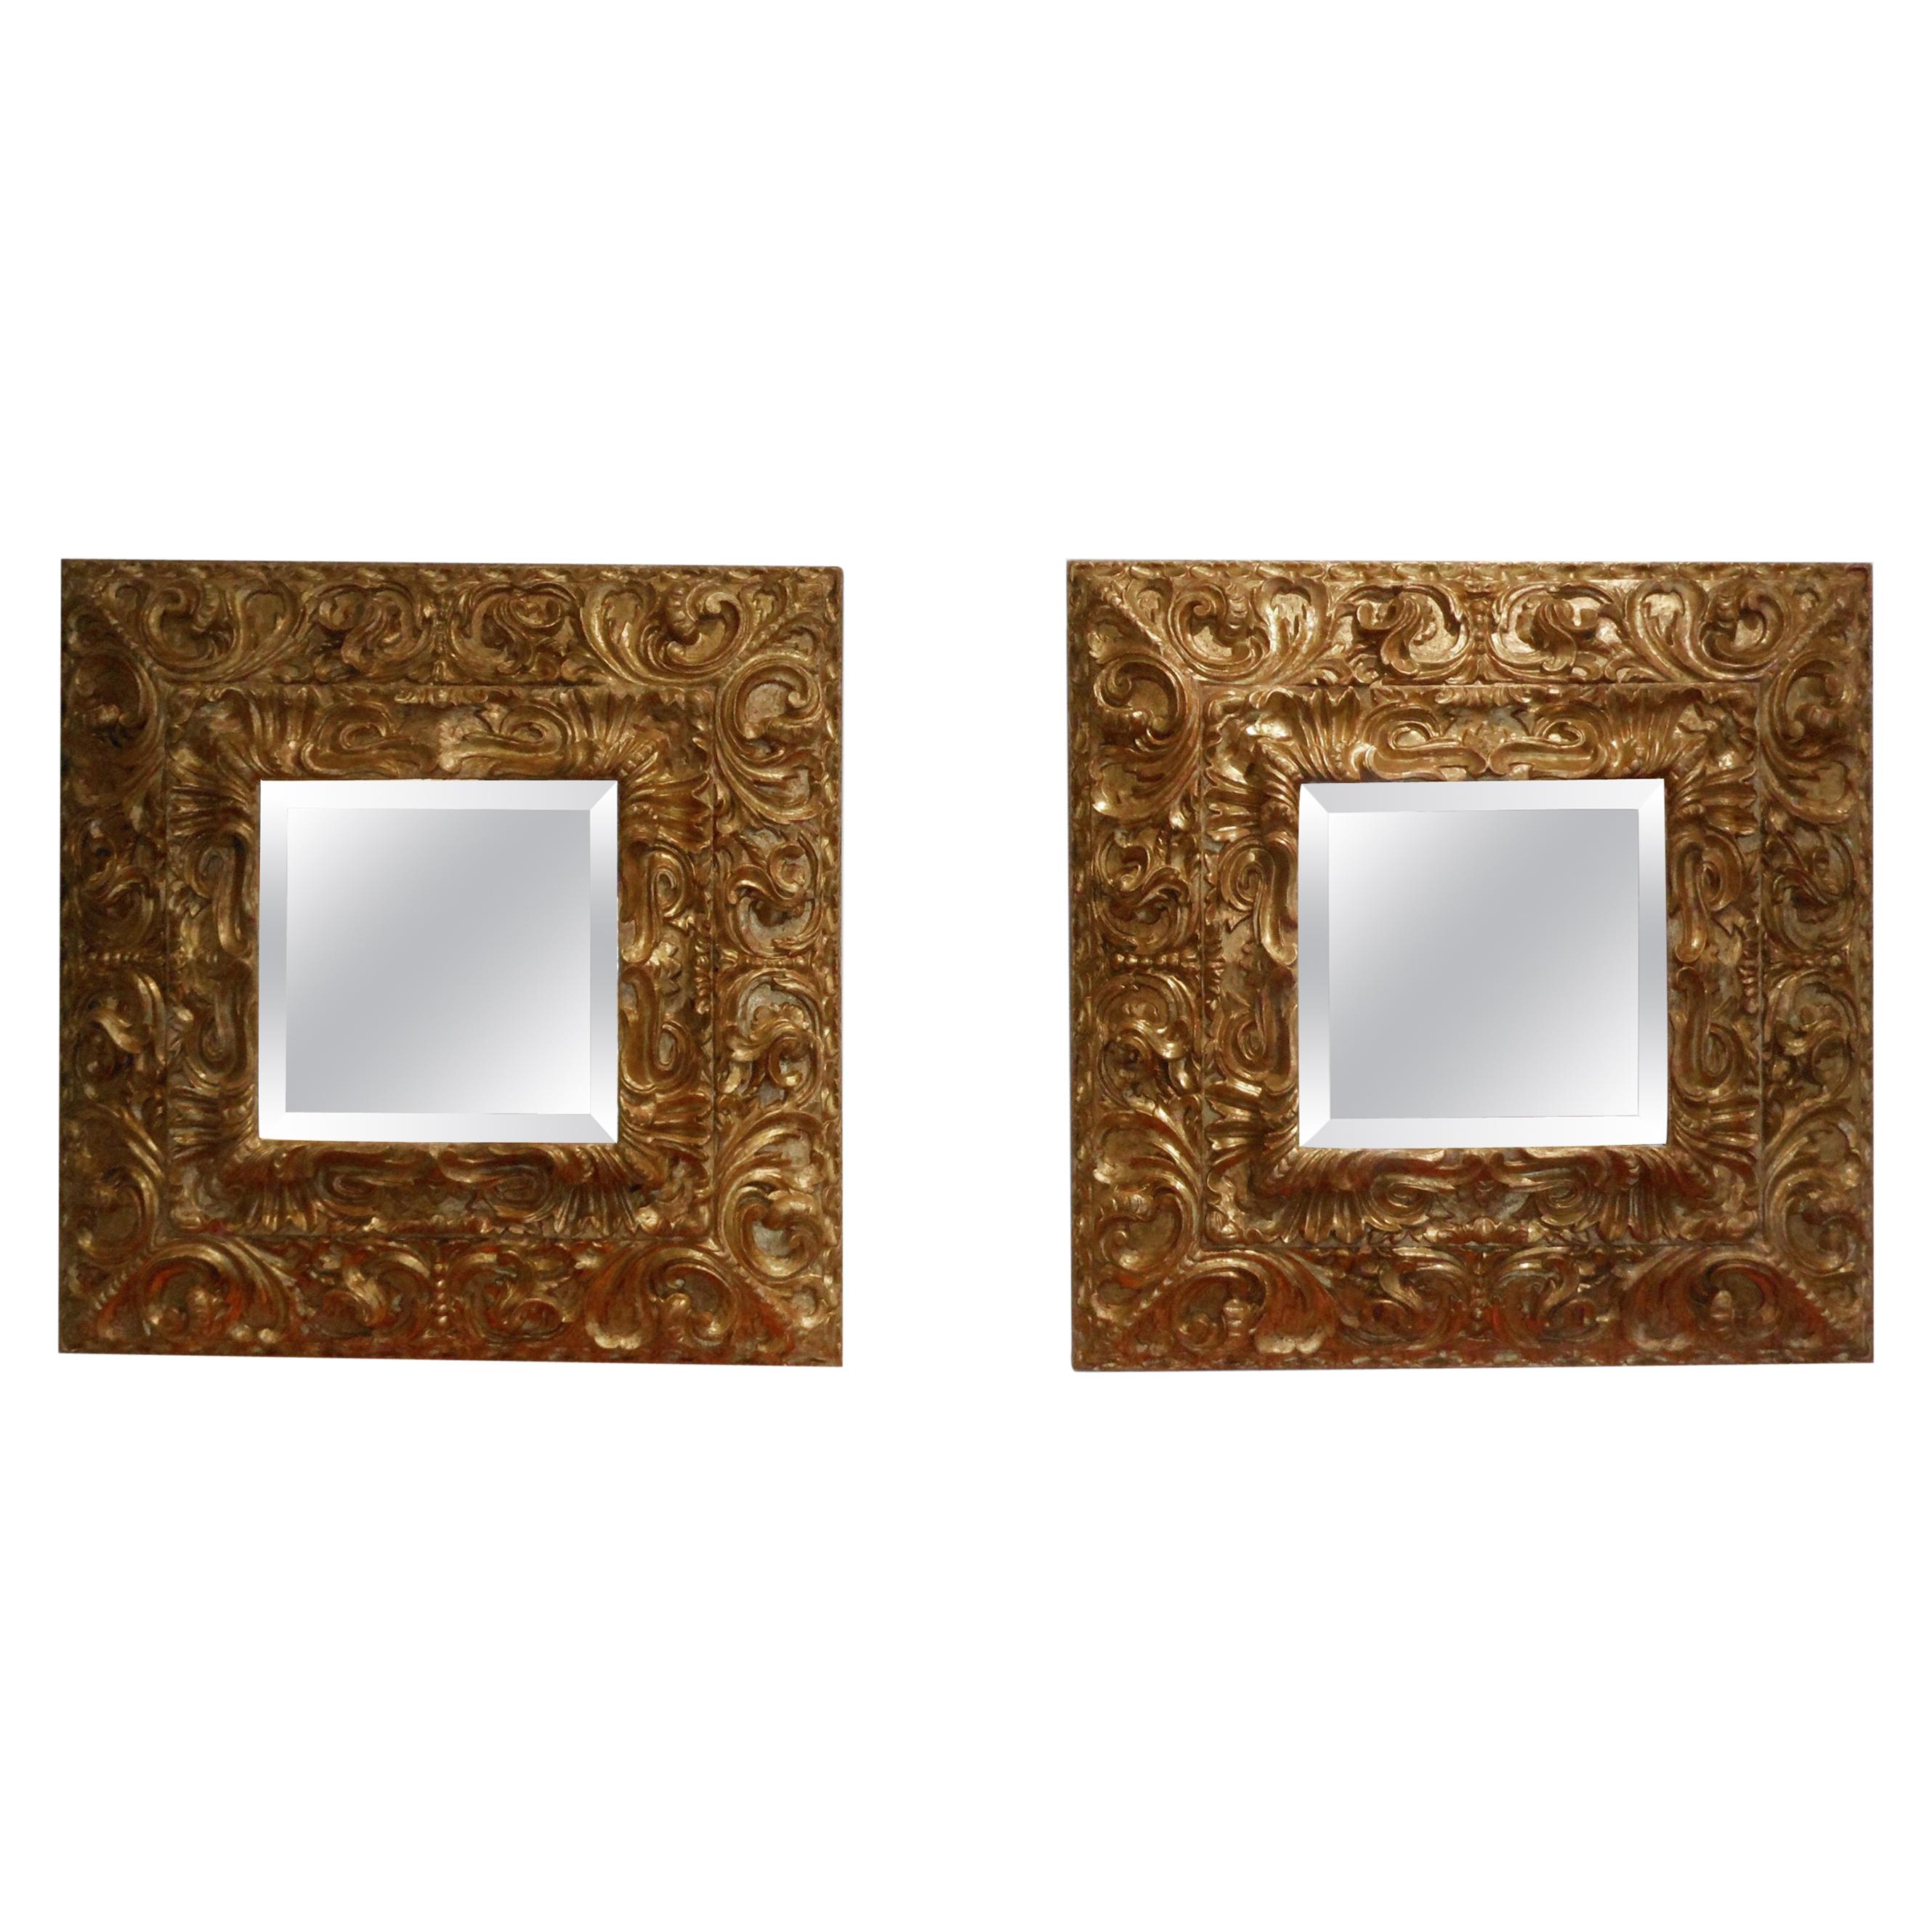 Pair of Magnificent Spanish Baroque Giltwood Mirrors For Sale